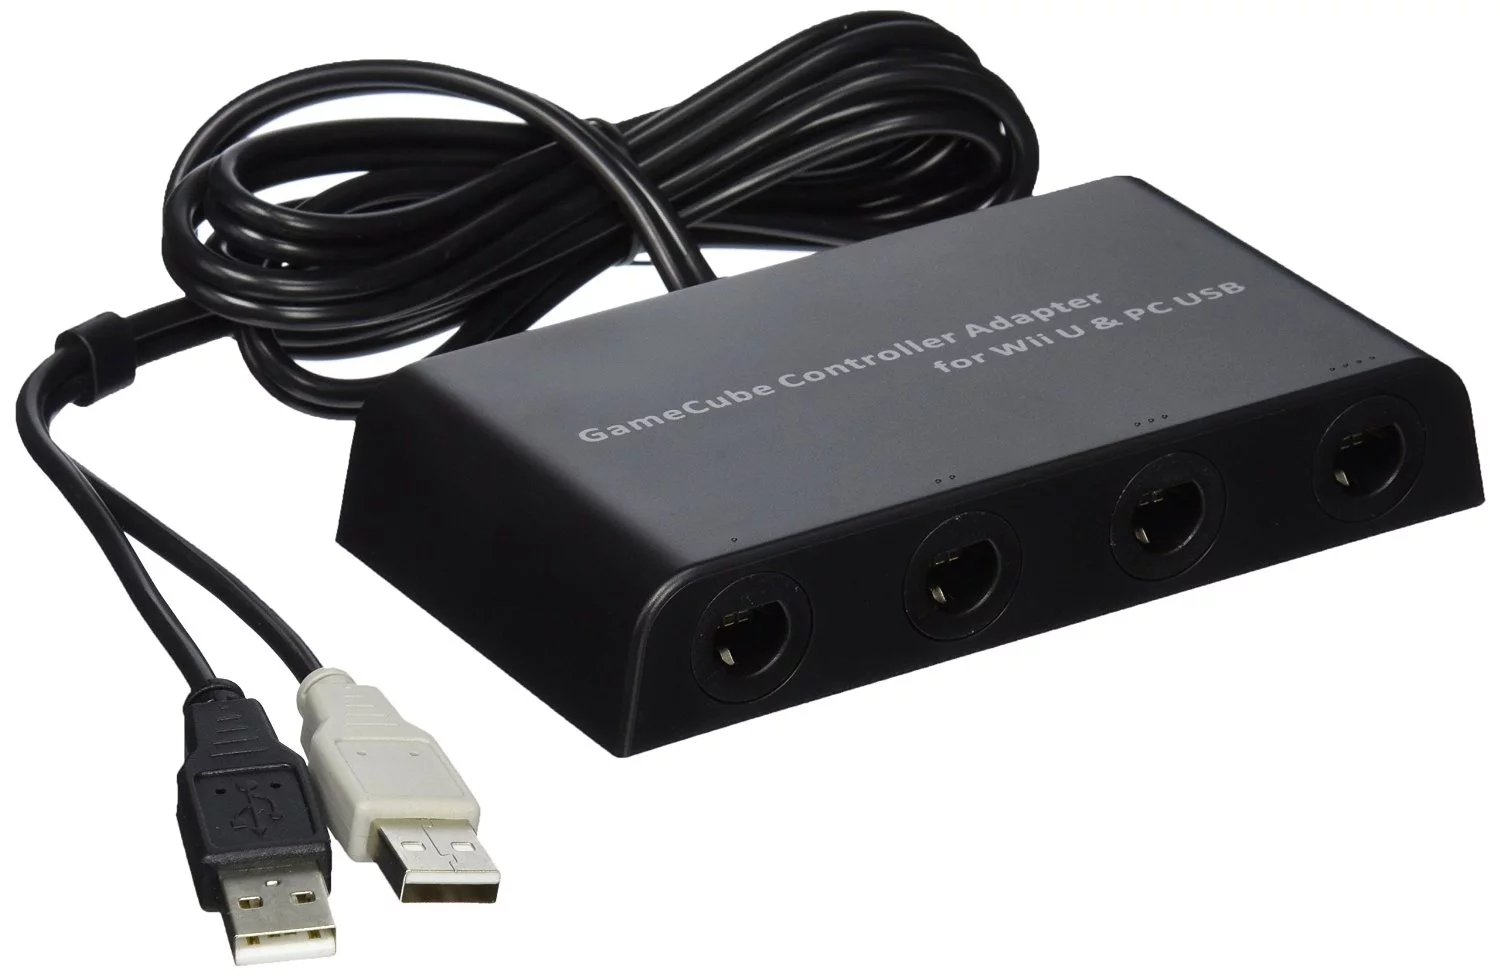 How To Use The Mayflash Gamecube Adapter On Pc